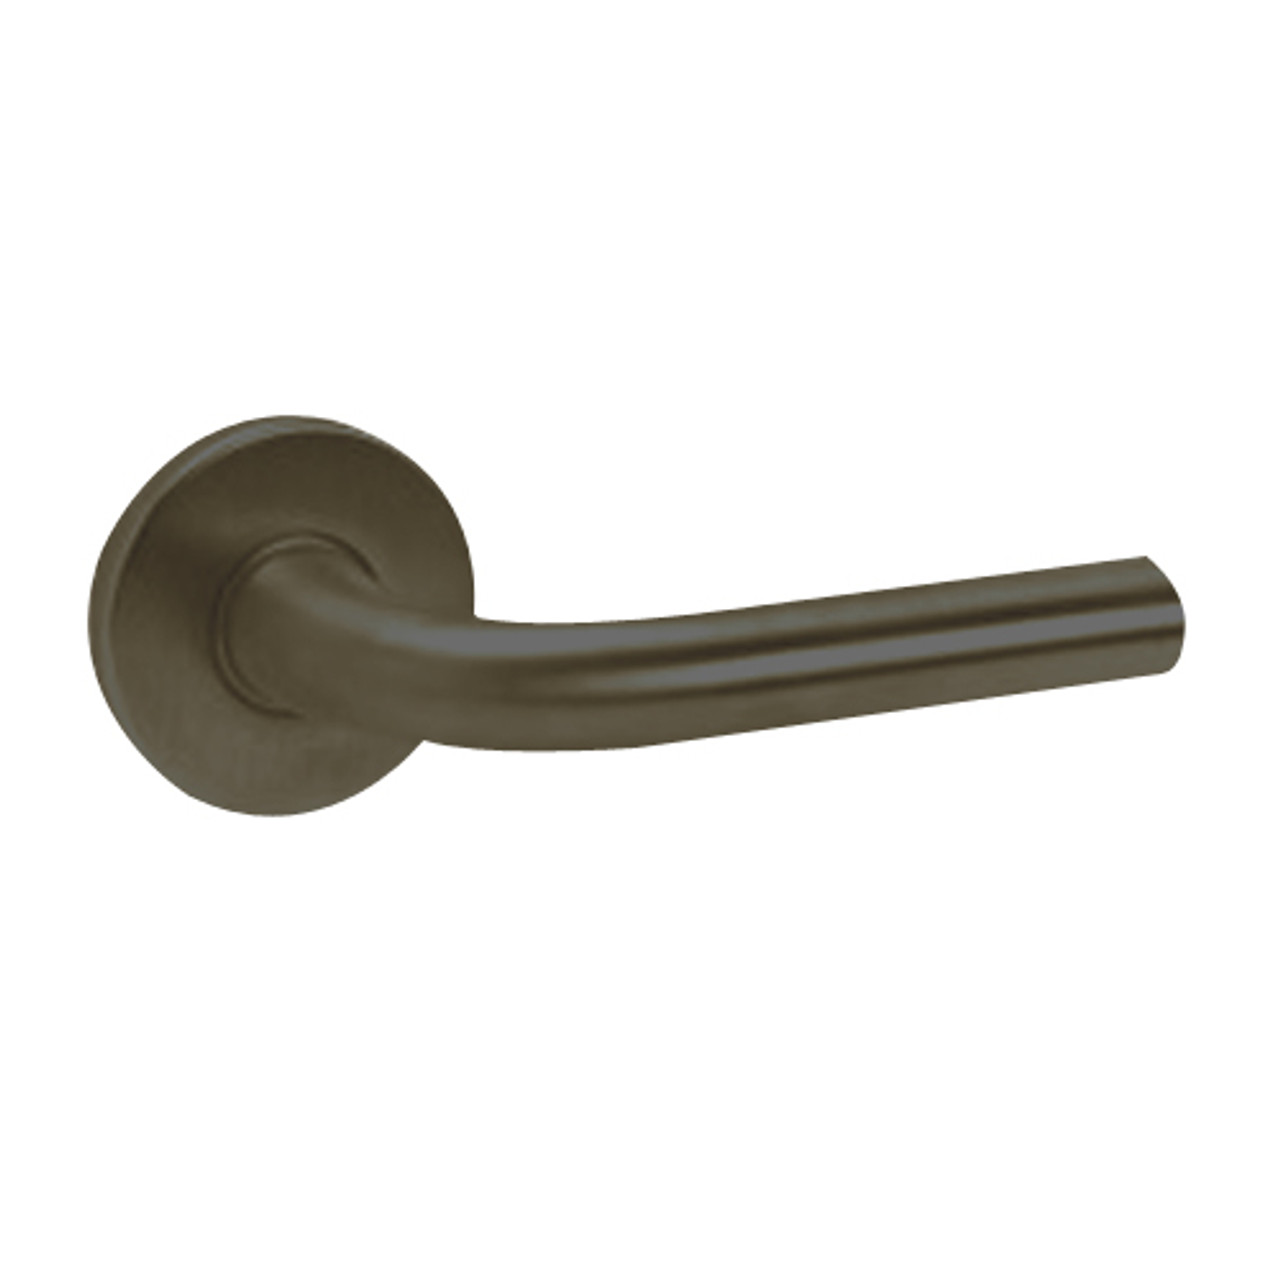 ML2067-RWF-613 Corbin Russwin ML2000 Series Mortise Apartment Locksets with Regis Lever and Deadbolt in Oil Rubbed Bronze